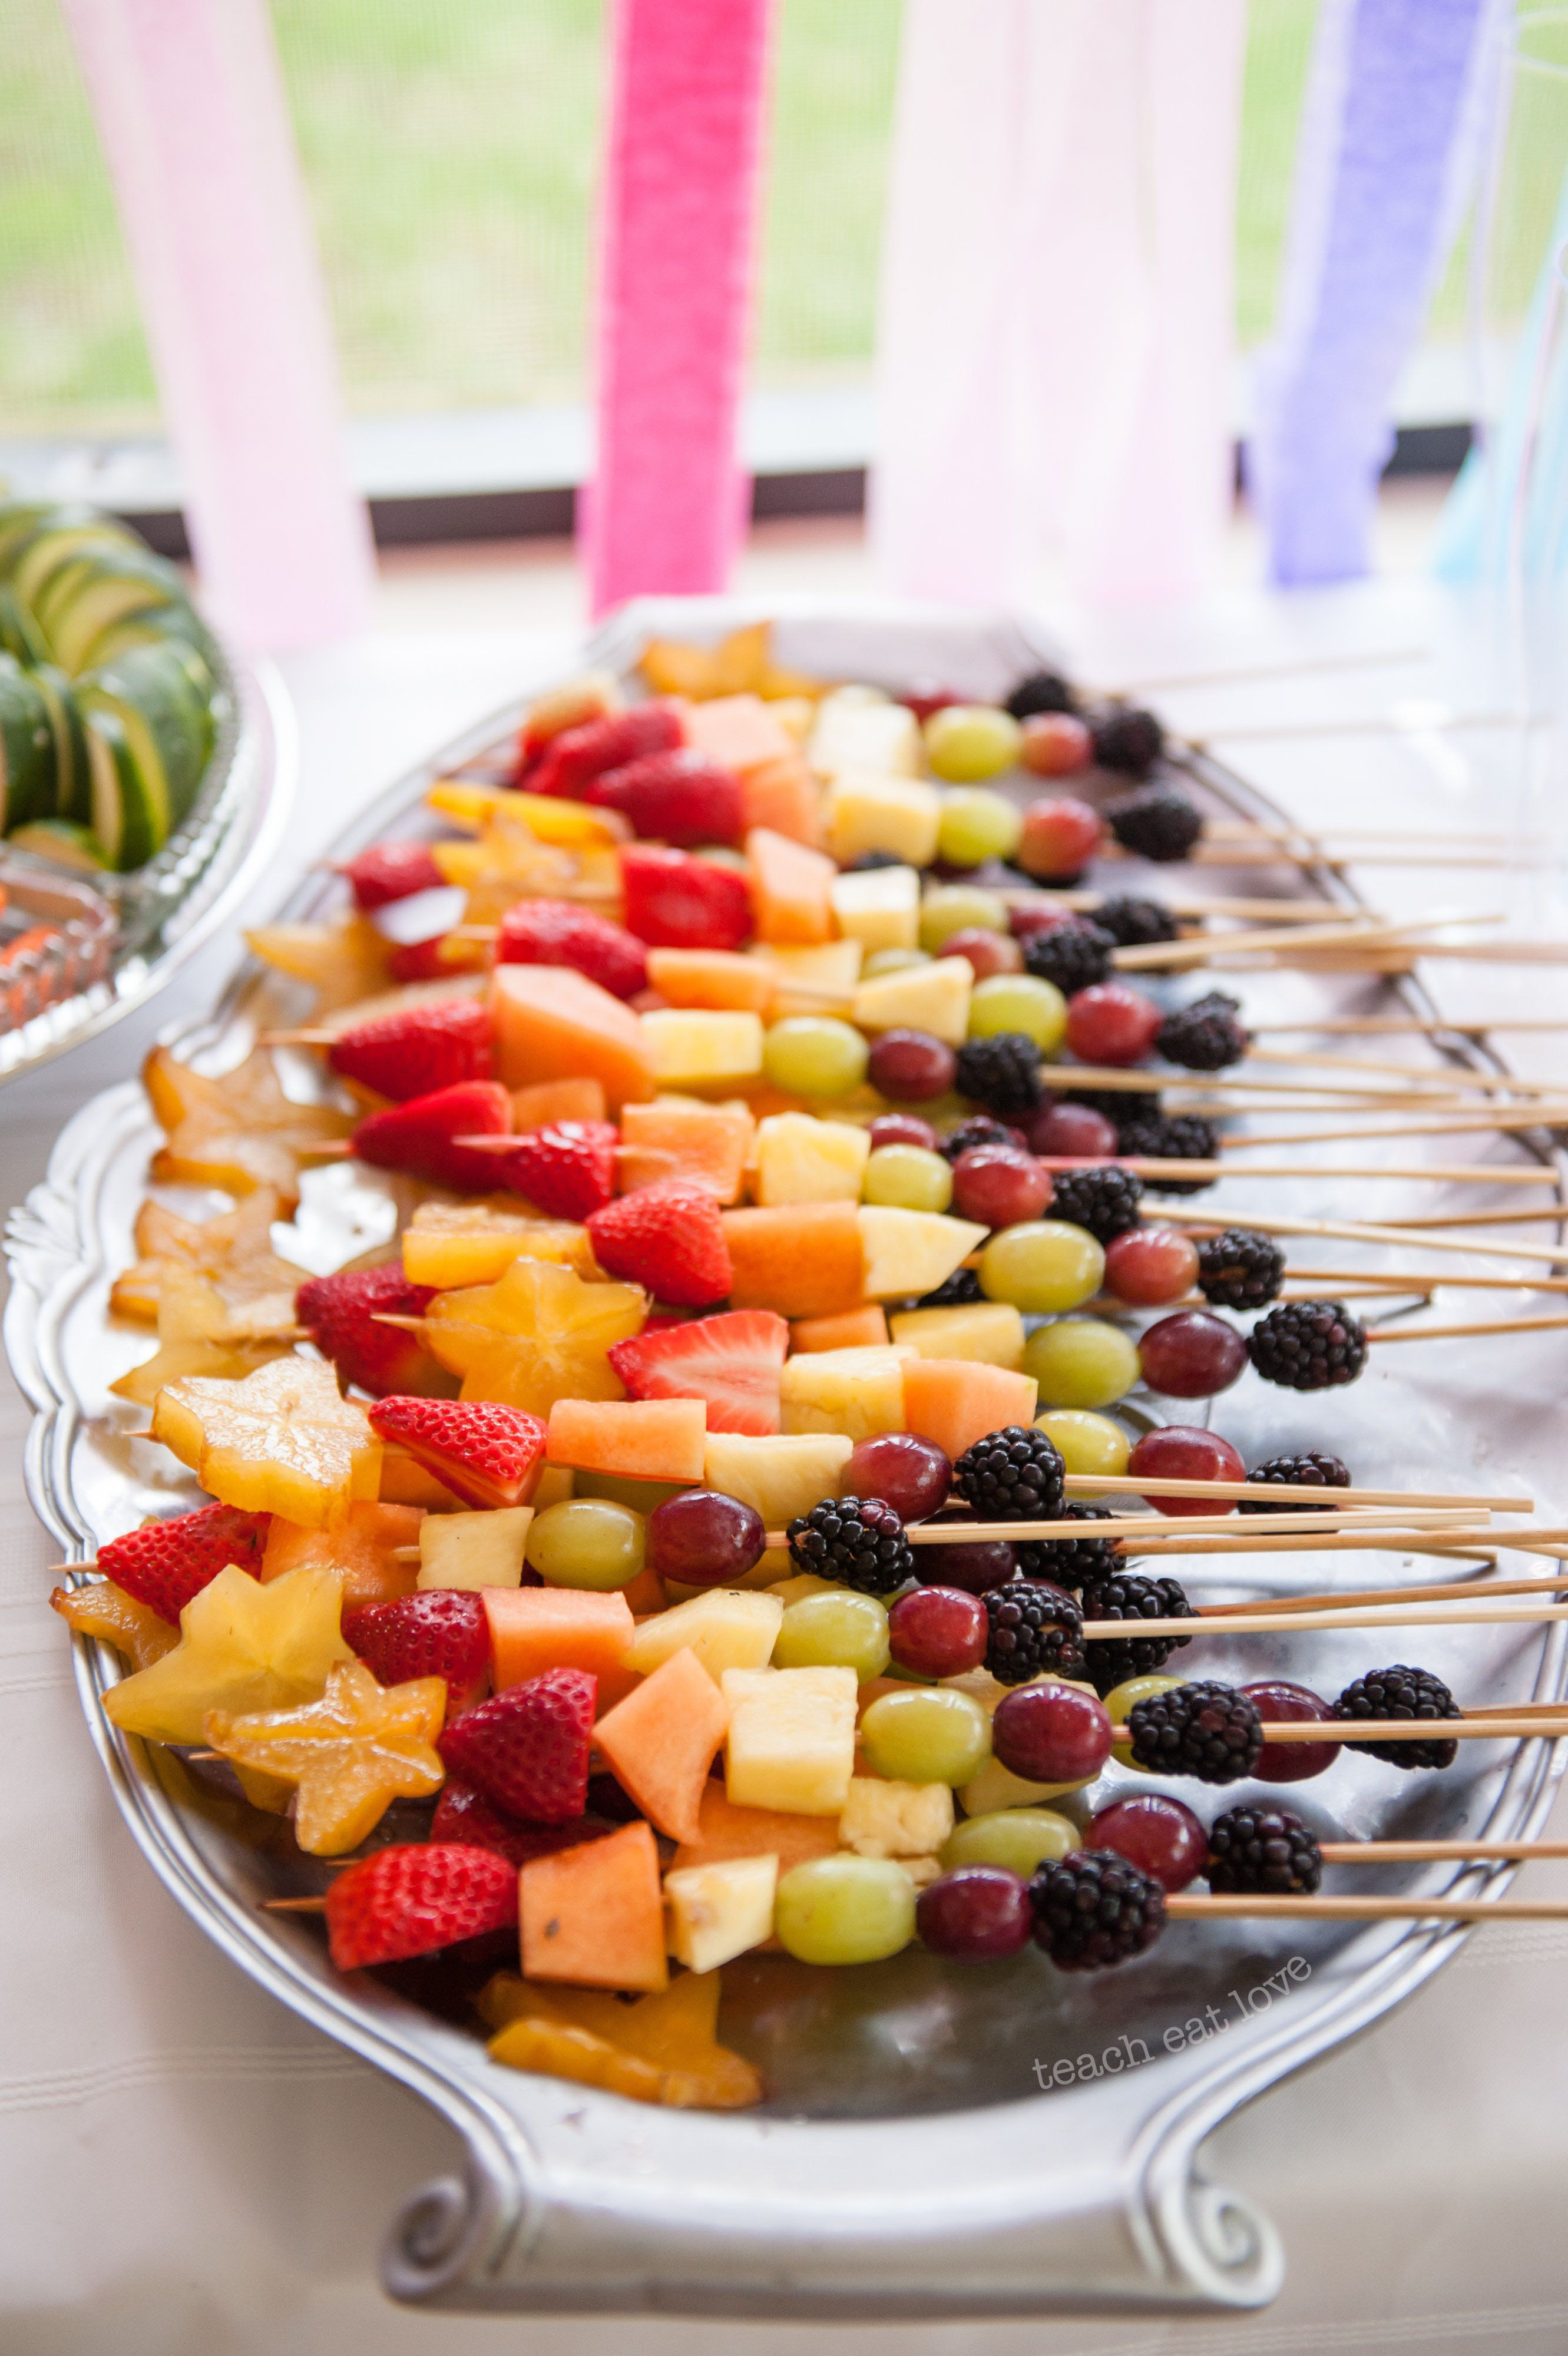 Ideas For Party Food
 The Baby’s First Birthday Recipe Round up and Fruit